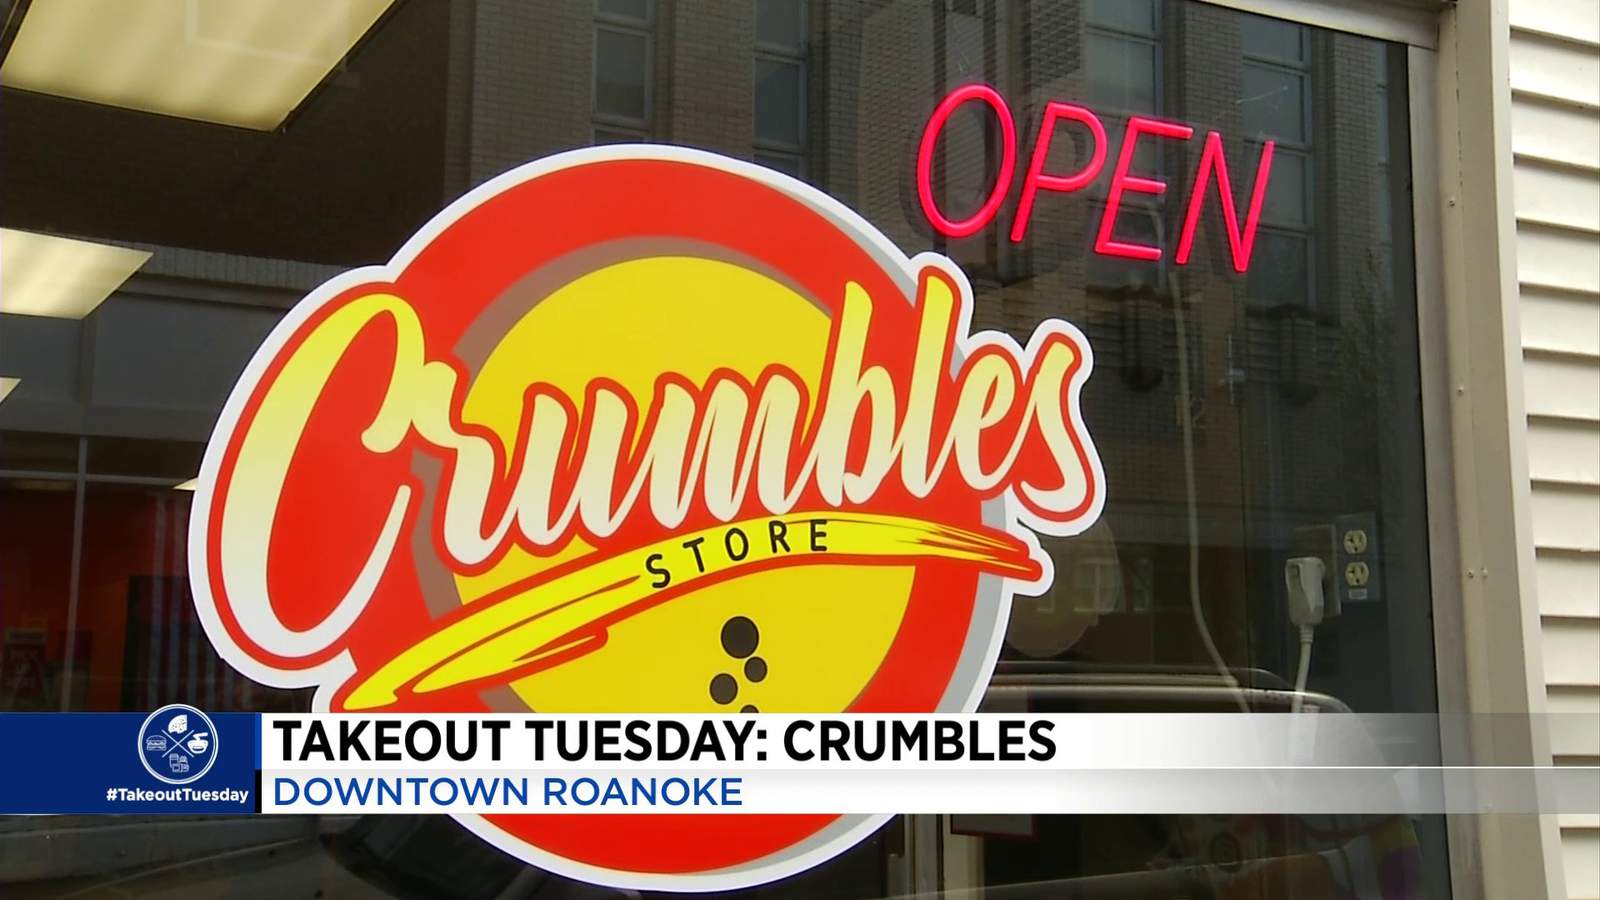 TAKEOUT TUESDAY: Crumbles Store